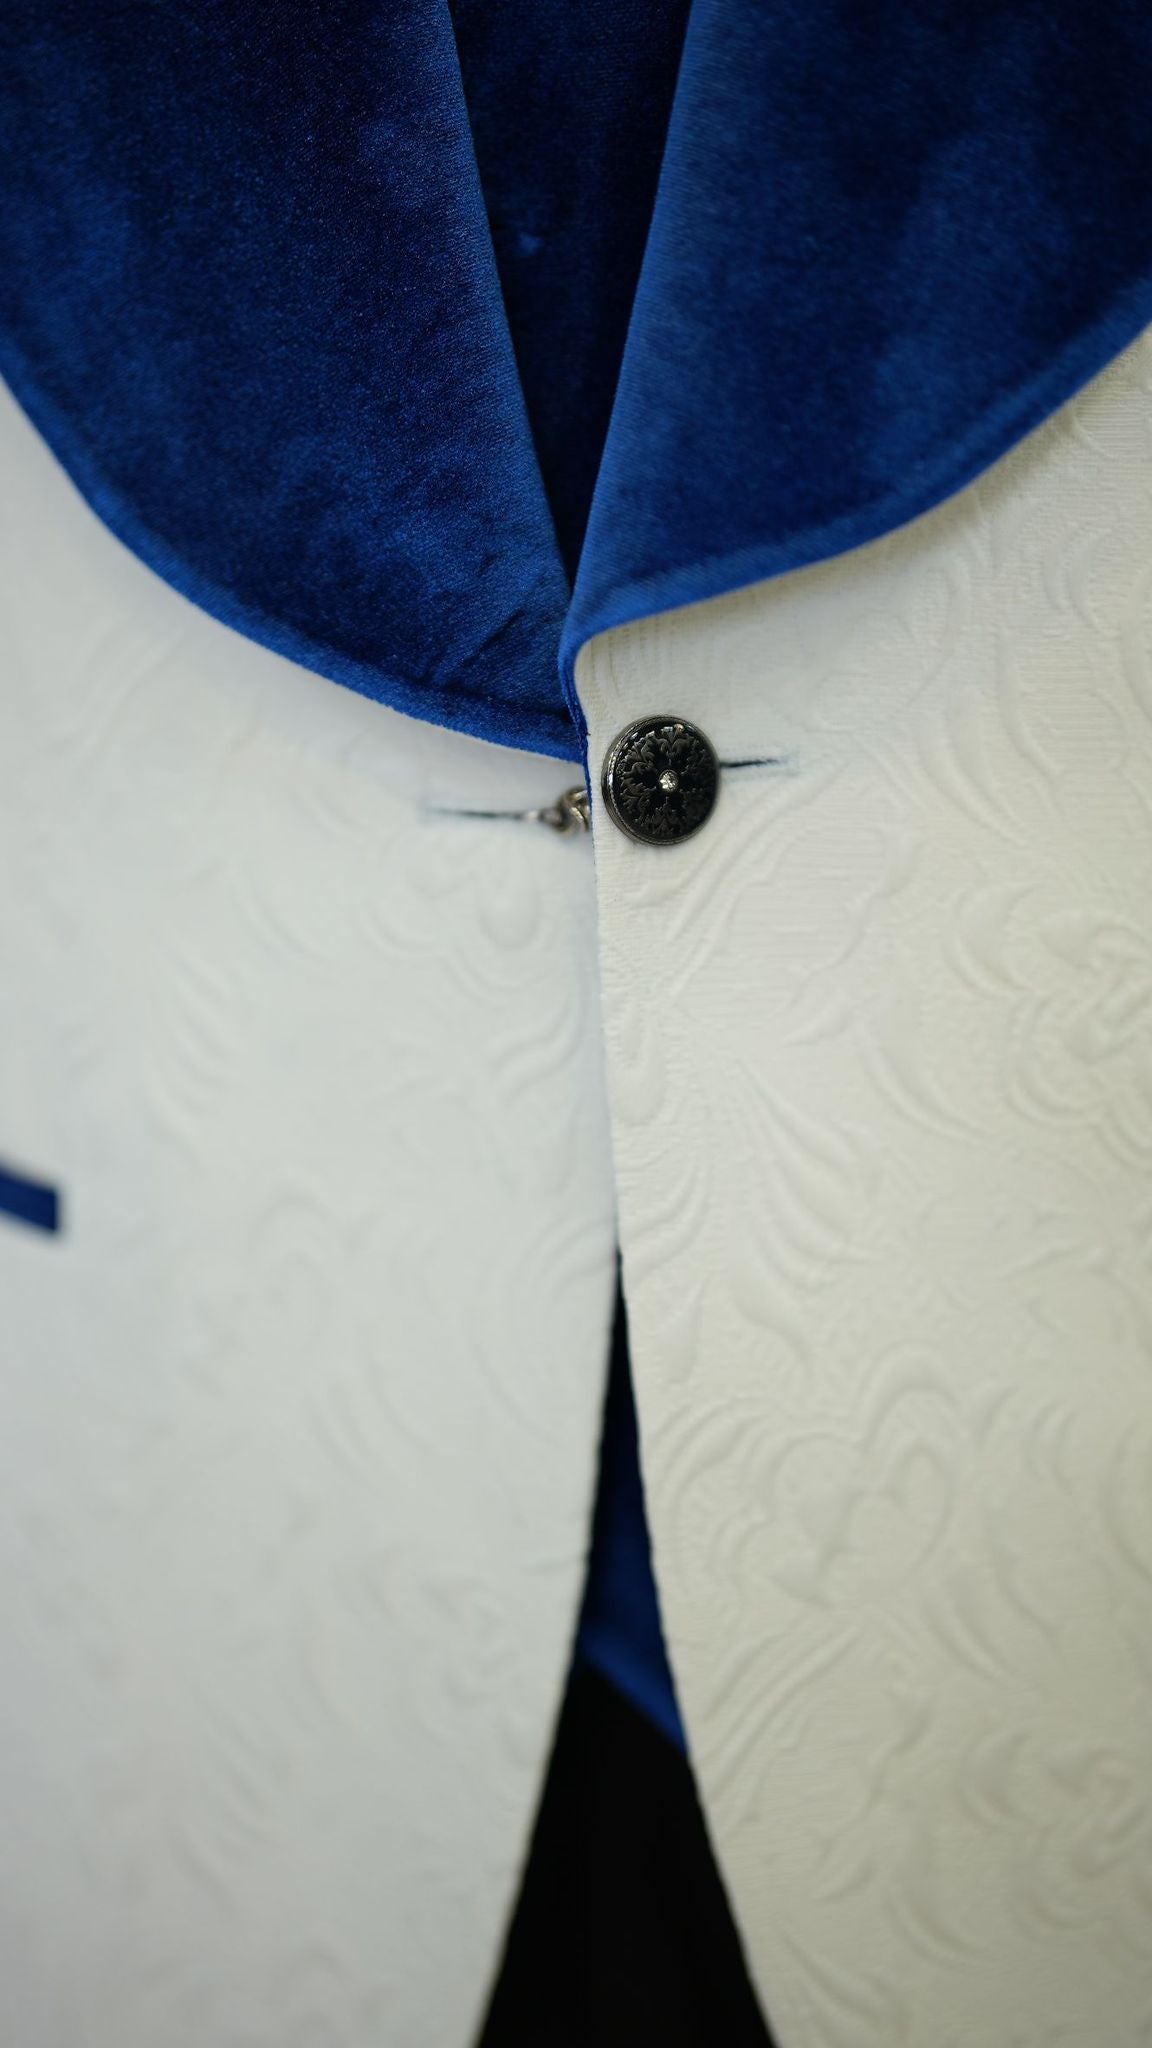 A Blue and White Tuxedo Suit on display.